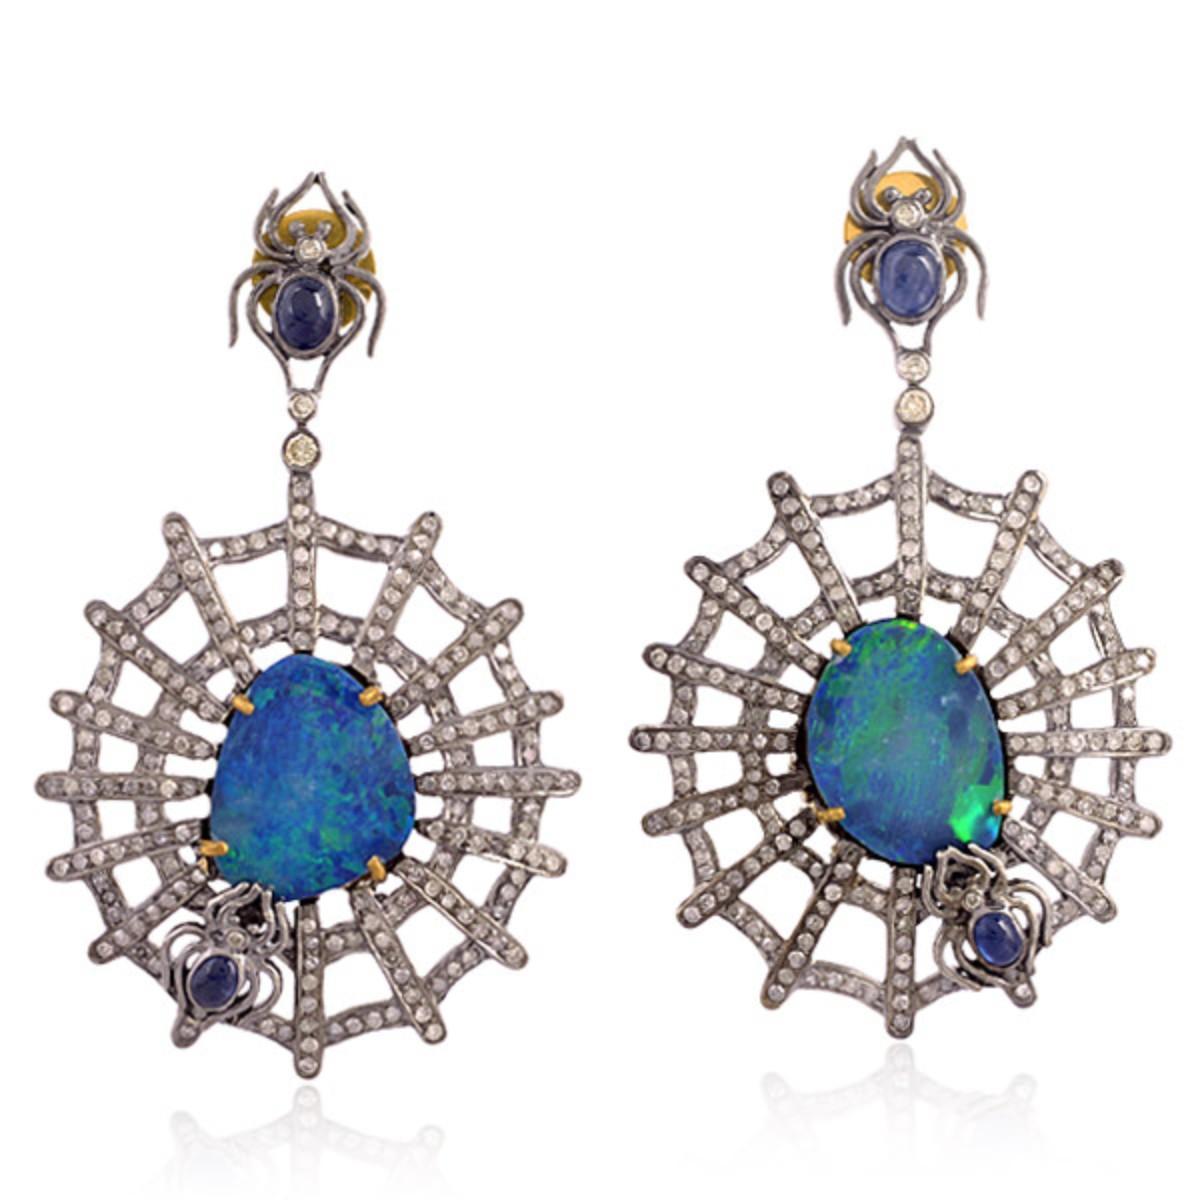 Mixed Cut Sliced Opal & Blue Sapphire Earrings with Spider & Web Design in Pave Diamonds For Sale